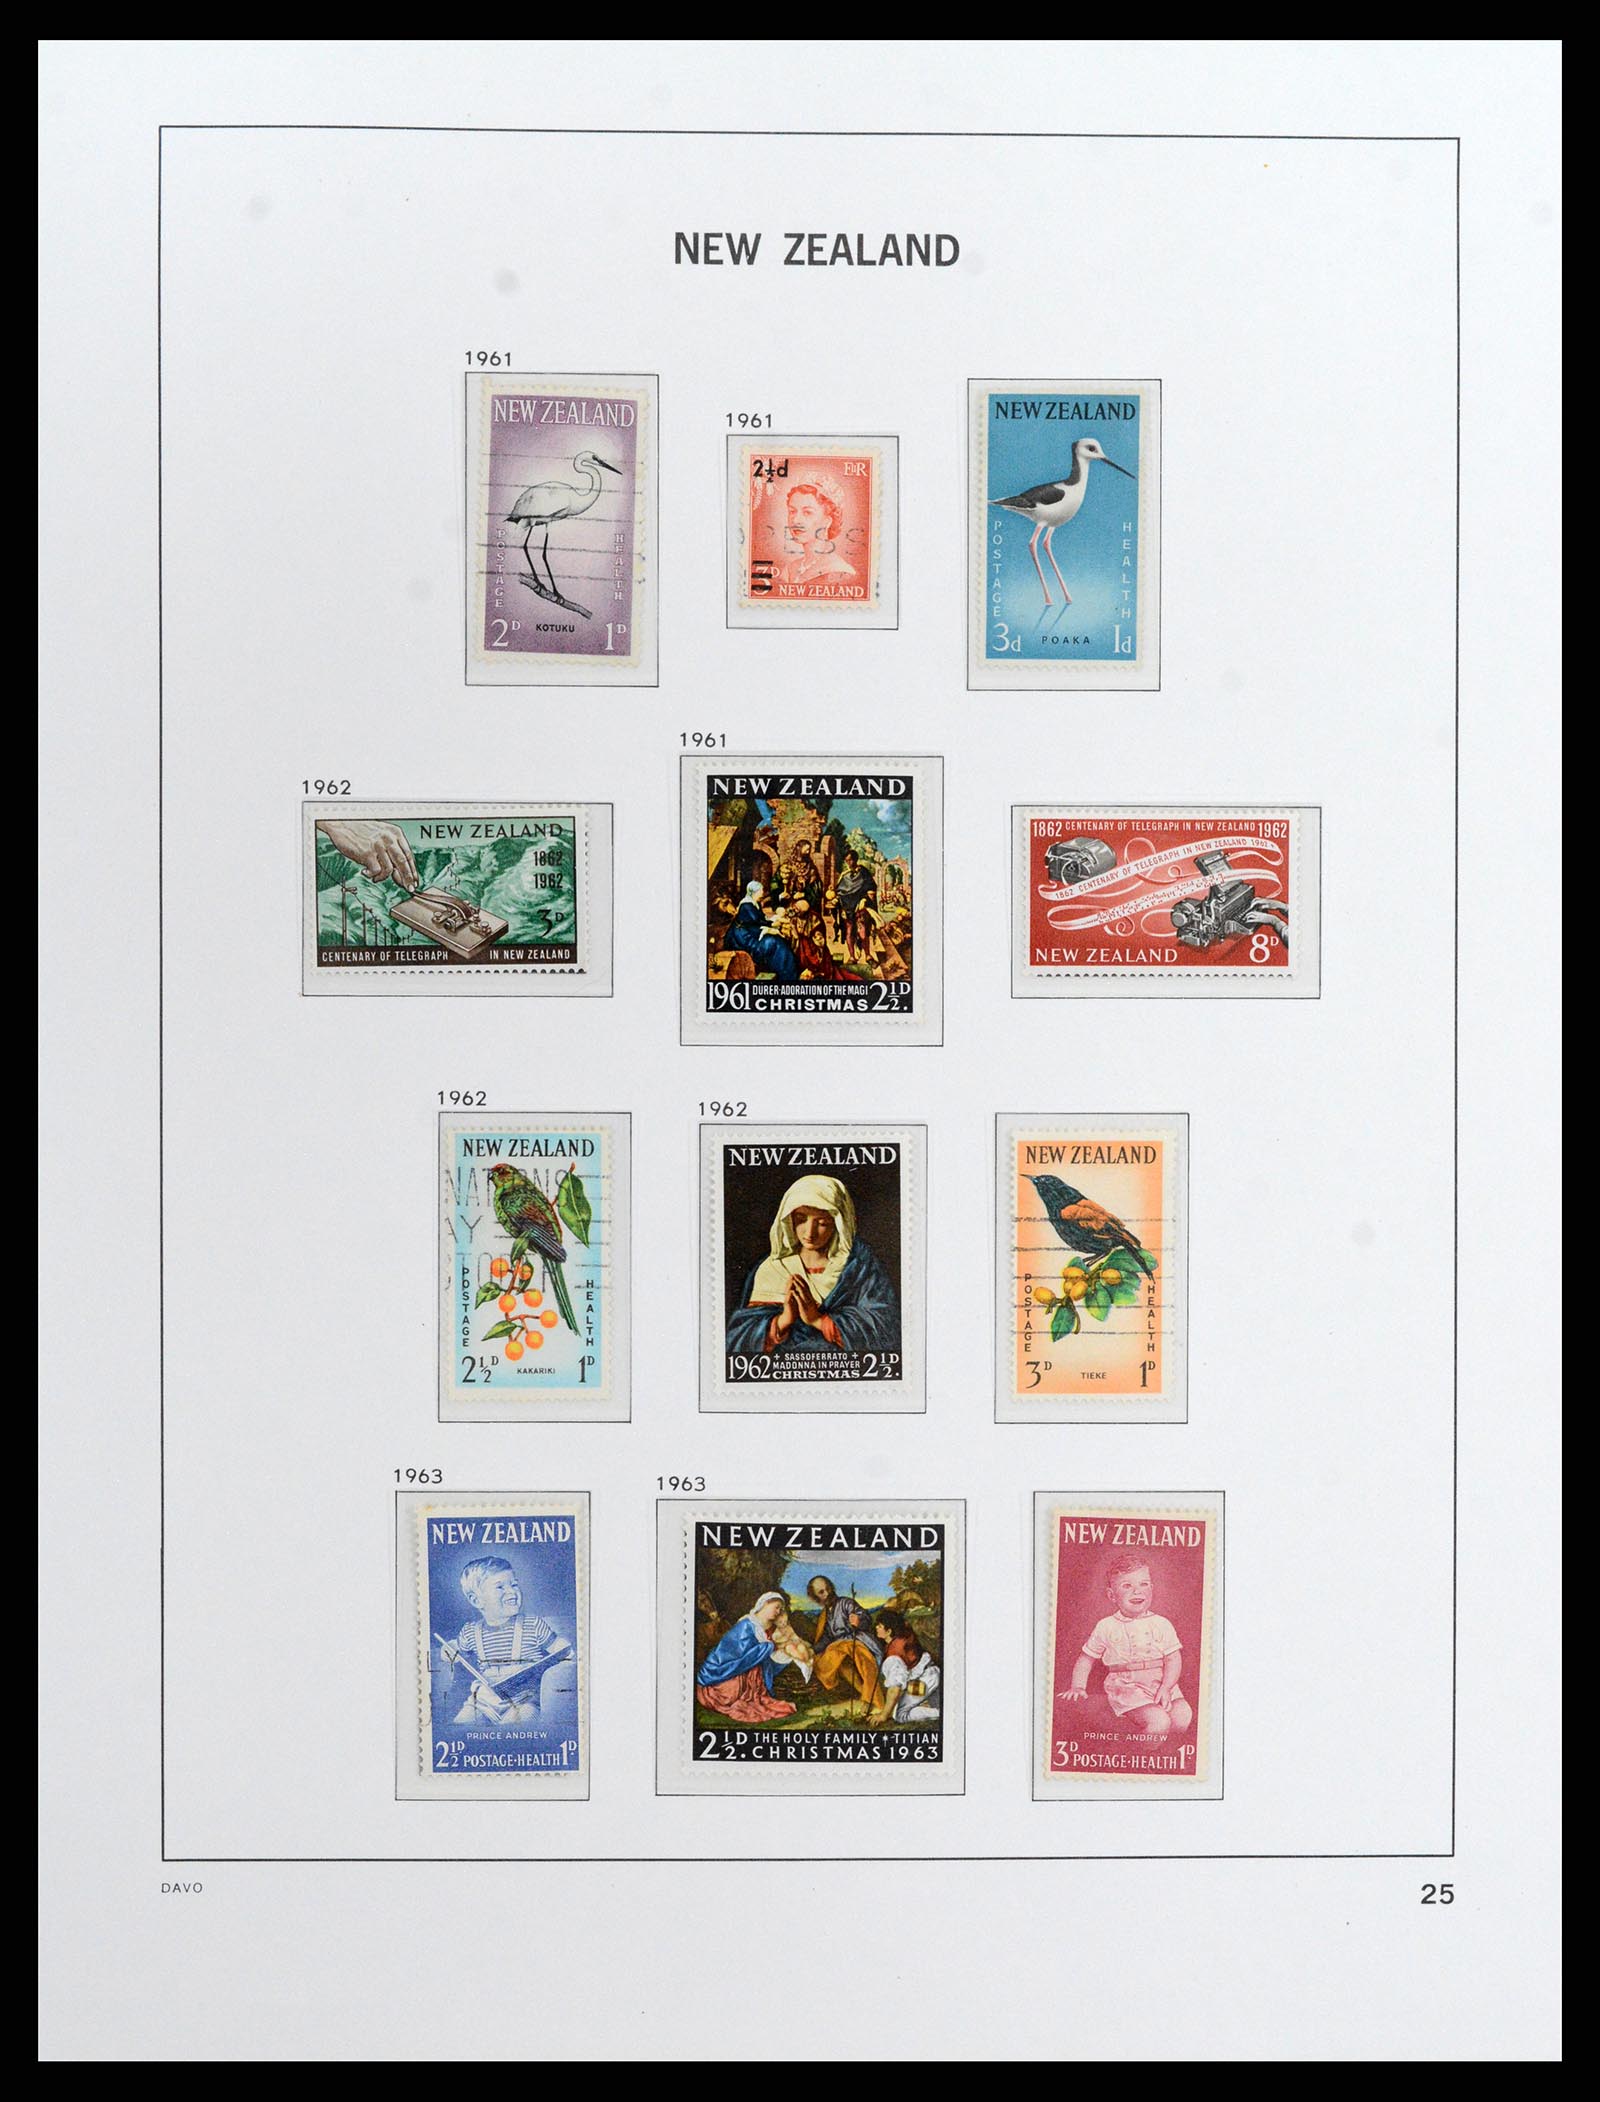 37731 024 - Stamp collection 37731 New Zealand 1873-1999.